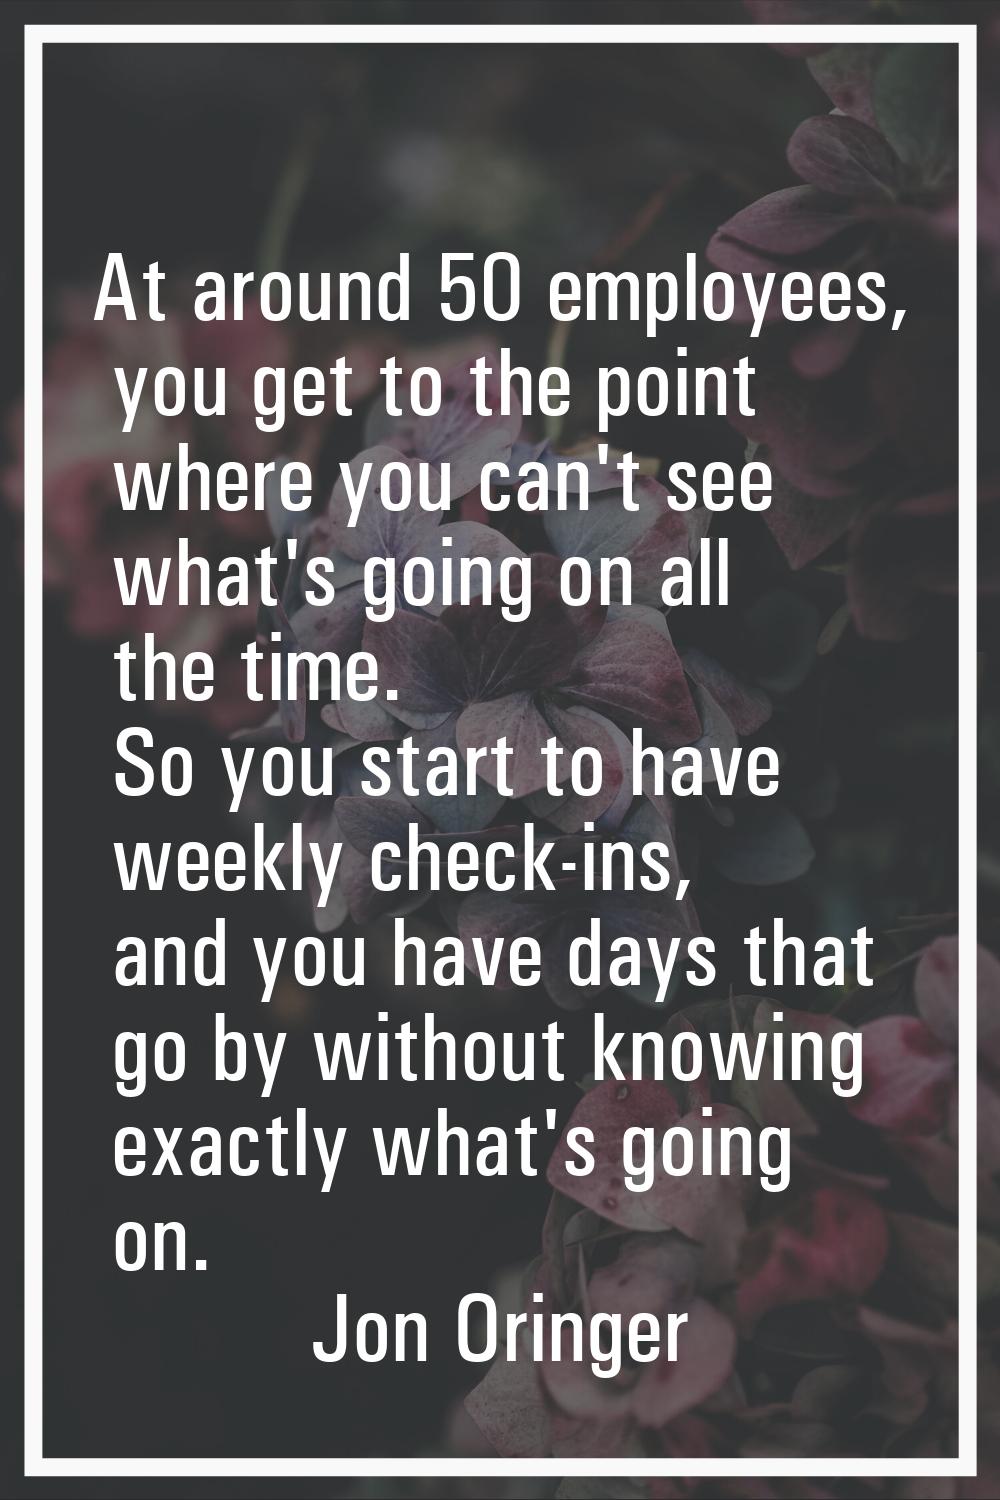 At around 50 employees, you get to the point where you can't see what's going on all the time. So y